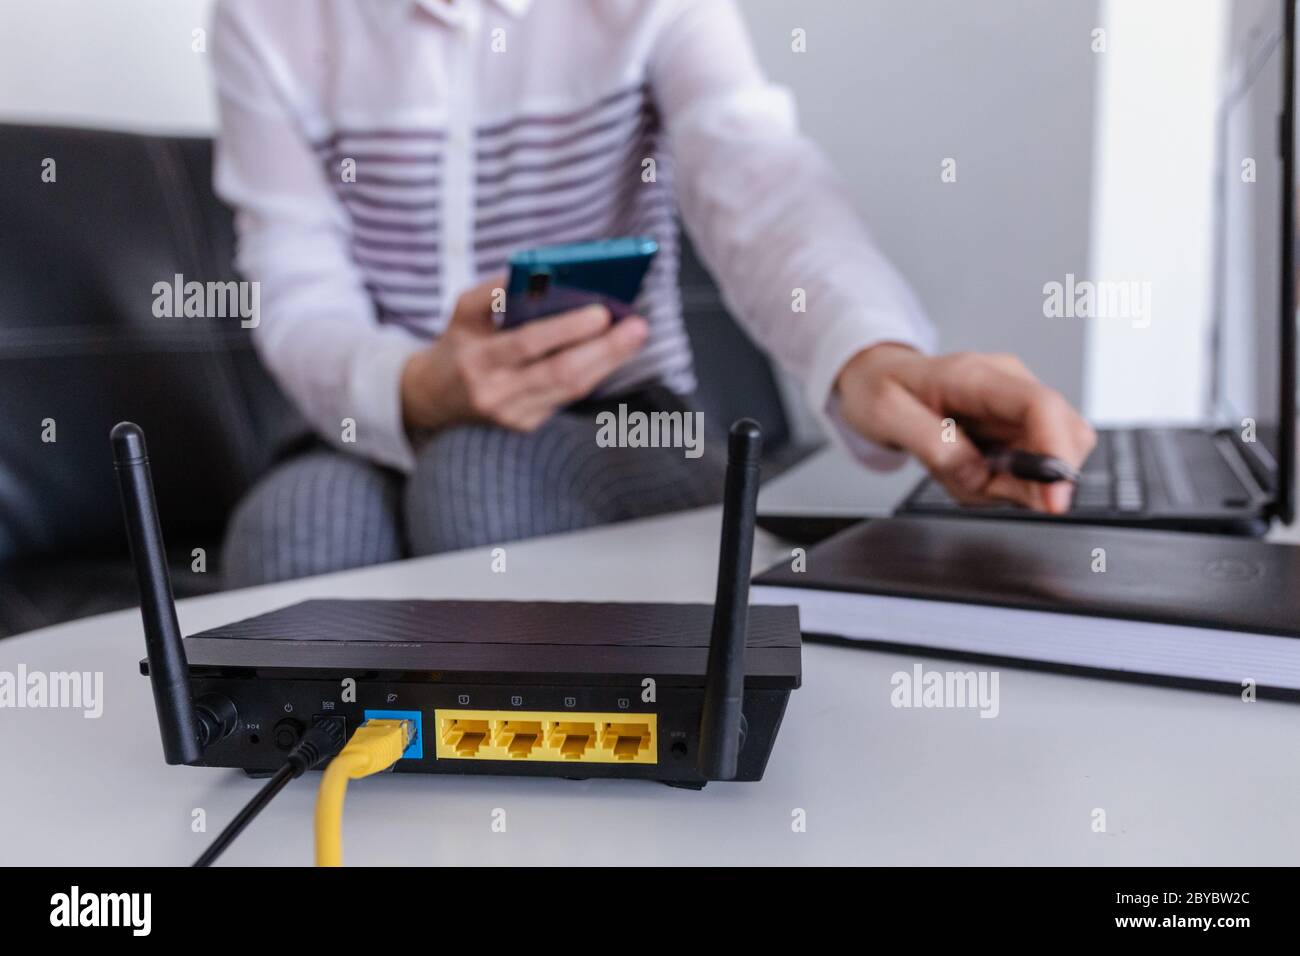 Wireless router and woman using a phone in office. router wireless broadband home laptop computer phone wifi concept Stock Photo